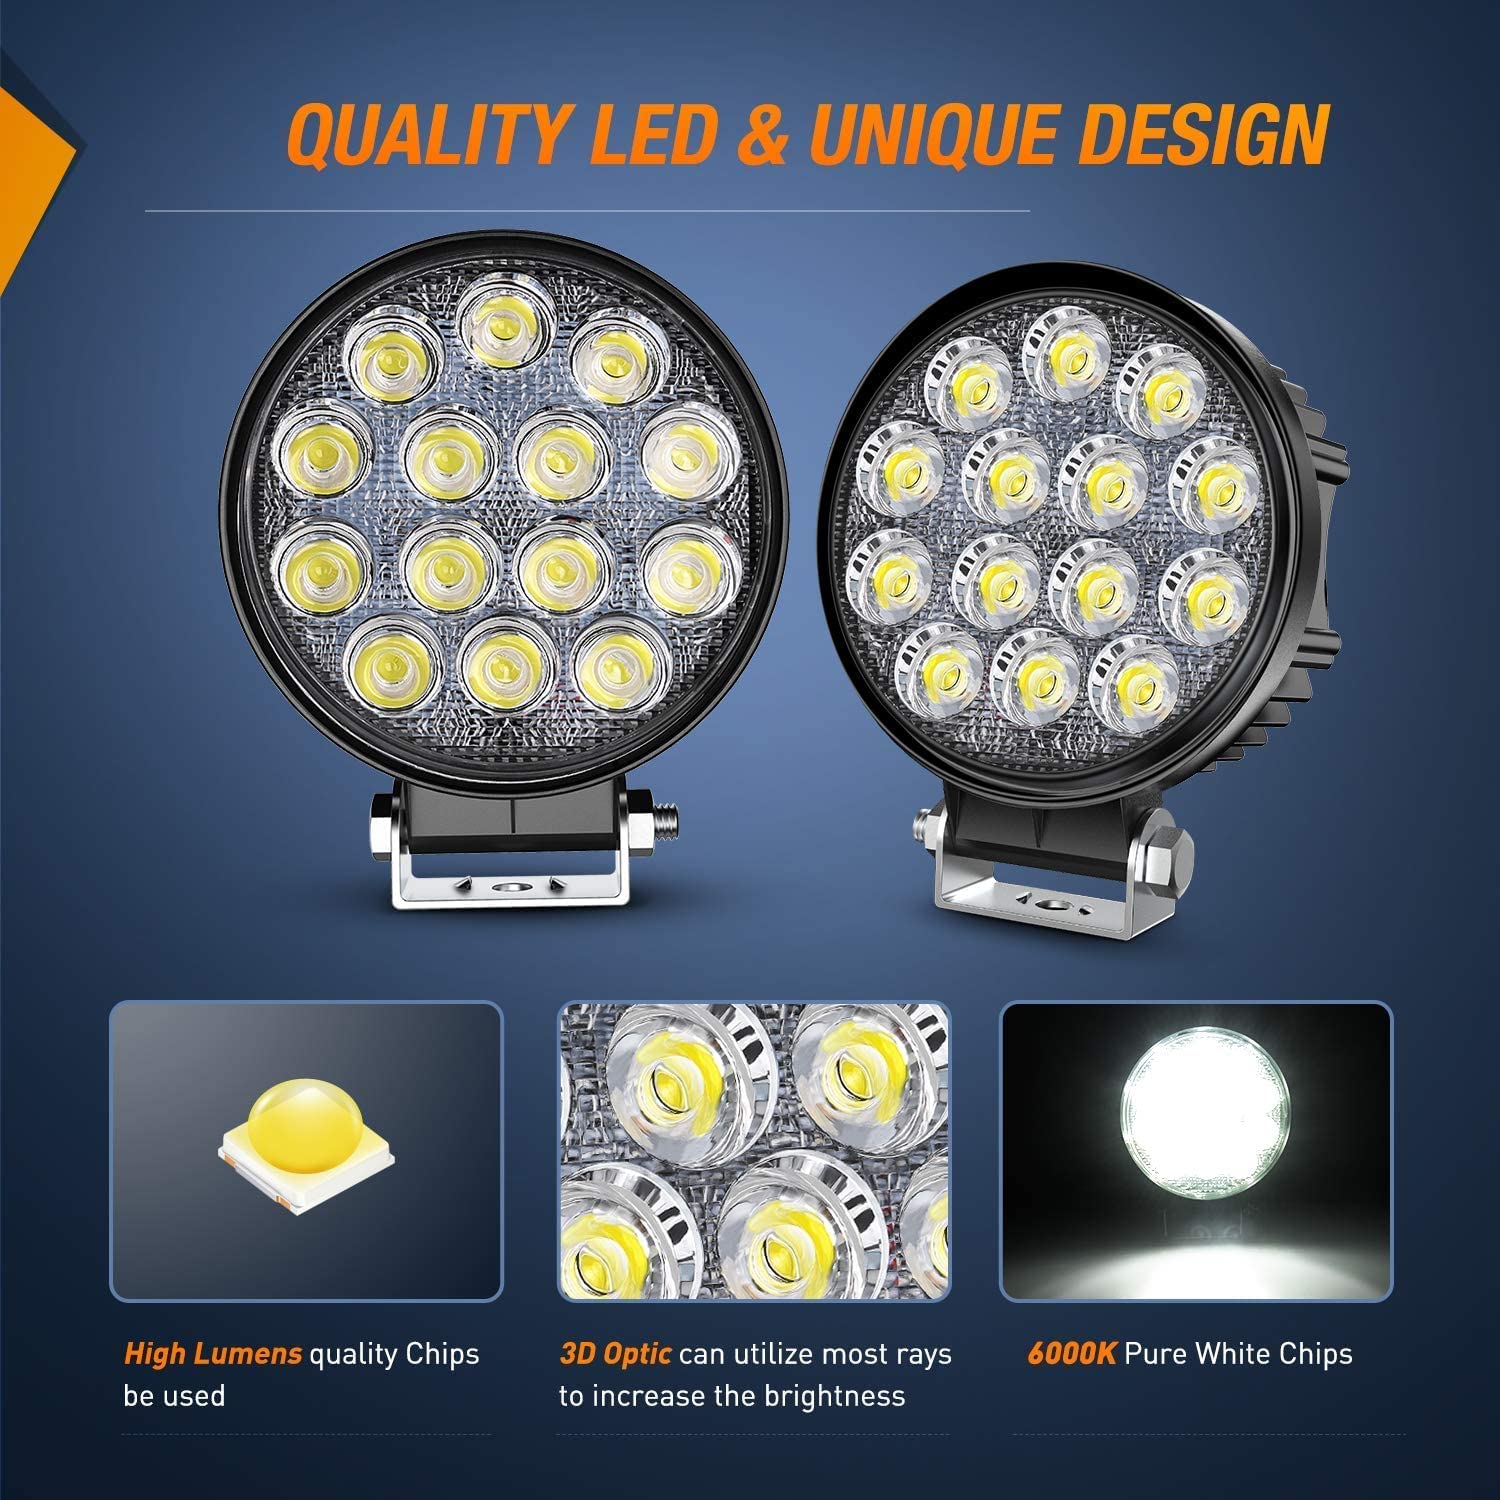 4.5" 42W 4200LM Round Flood LED Work Lights (Pair) | 16AWG Wire 3Pin Switch Nilight